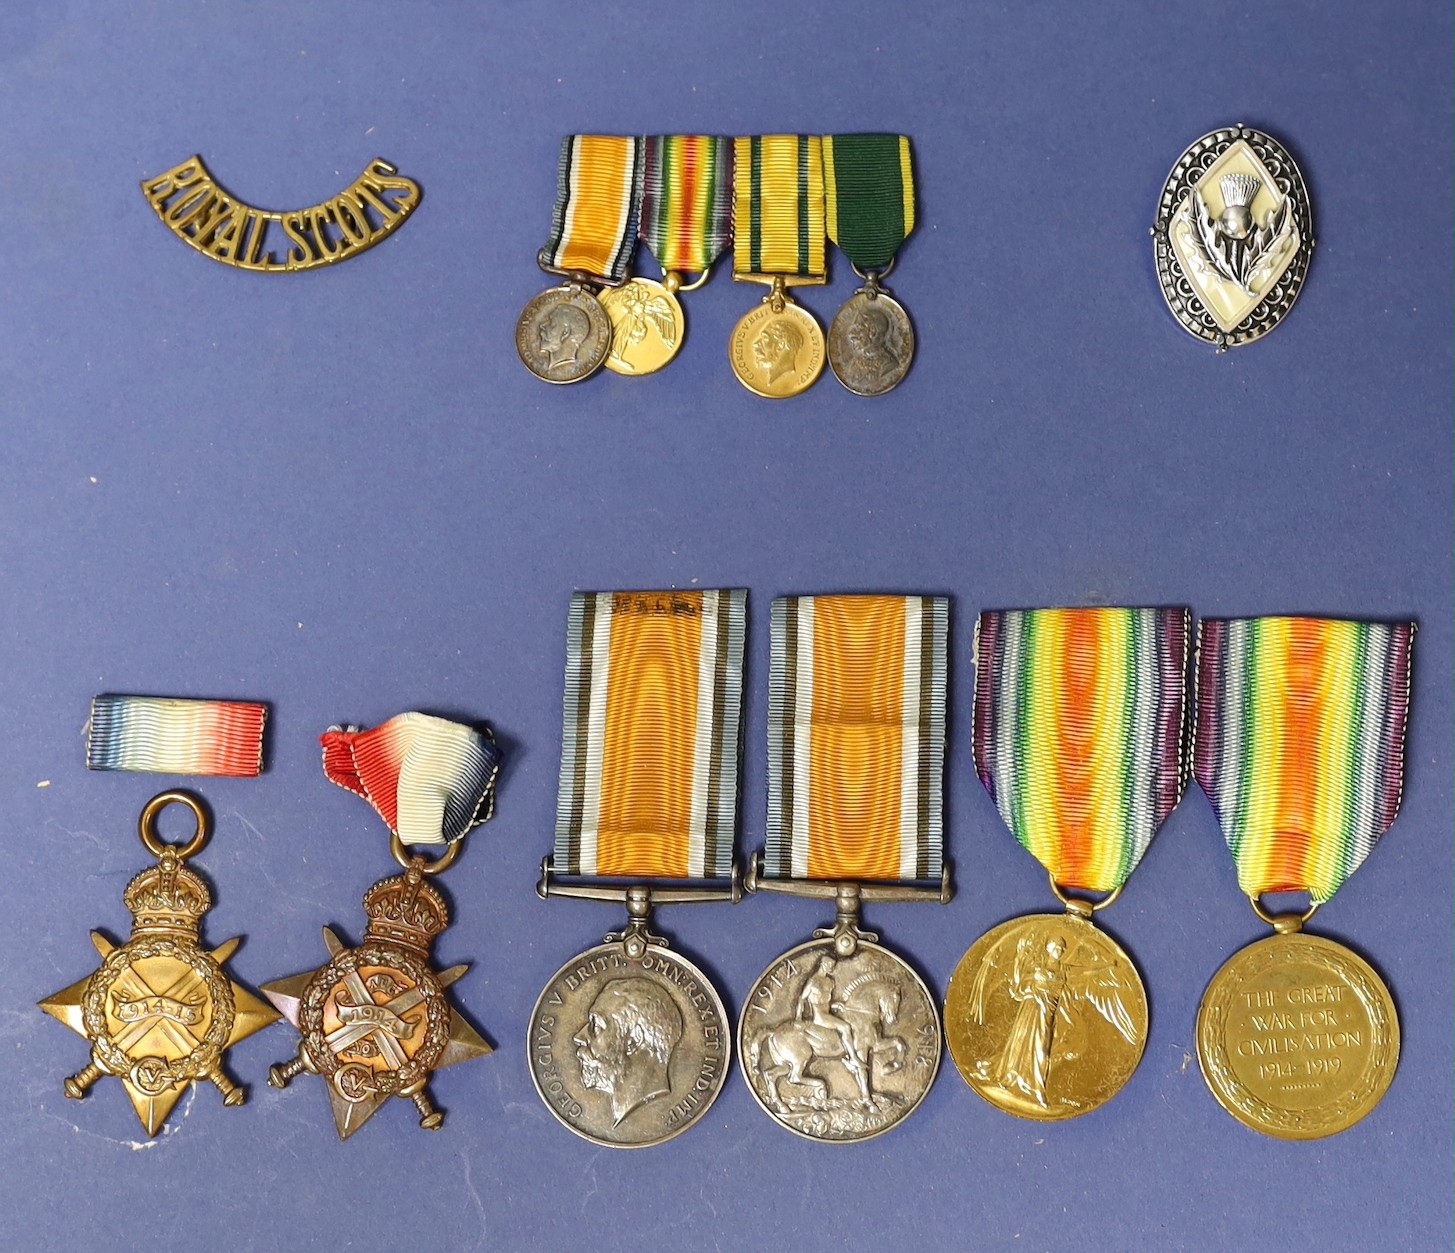 Two WWI family medal trios to 9098 Pte. A Paterson 2/R Scots. including Mons star and to 11619